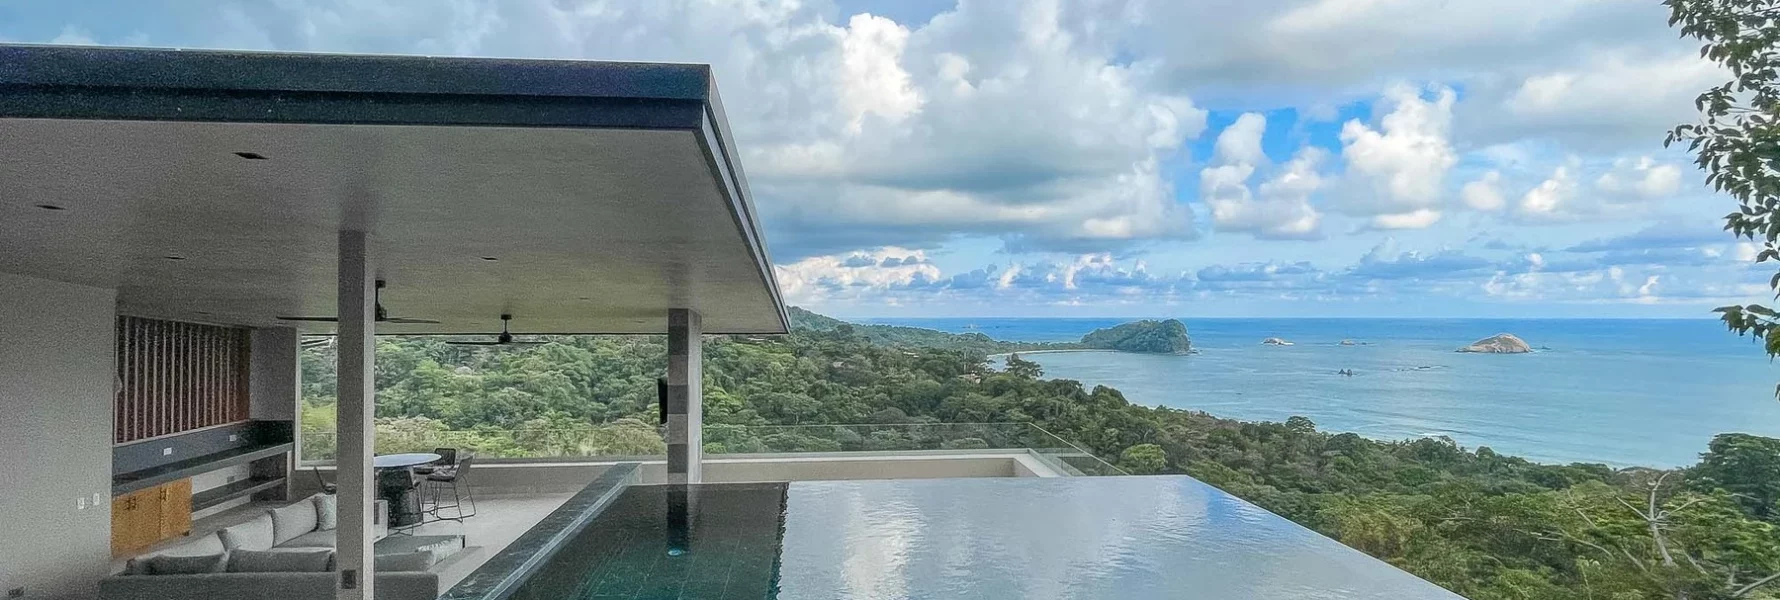 This modern luxury vacation villa features a rooftop infinity saltwater pool with breathtaking panoramic views.